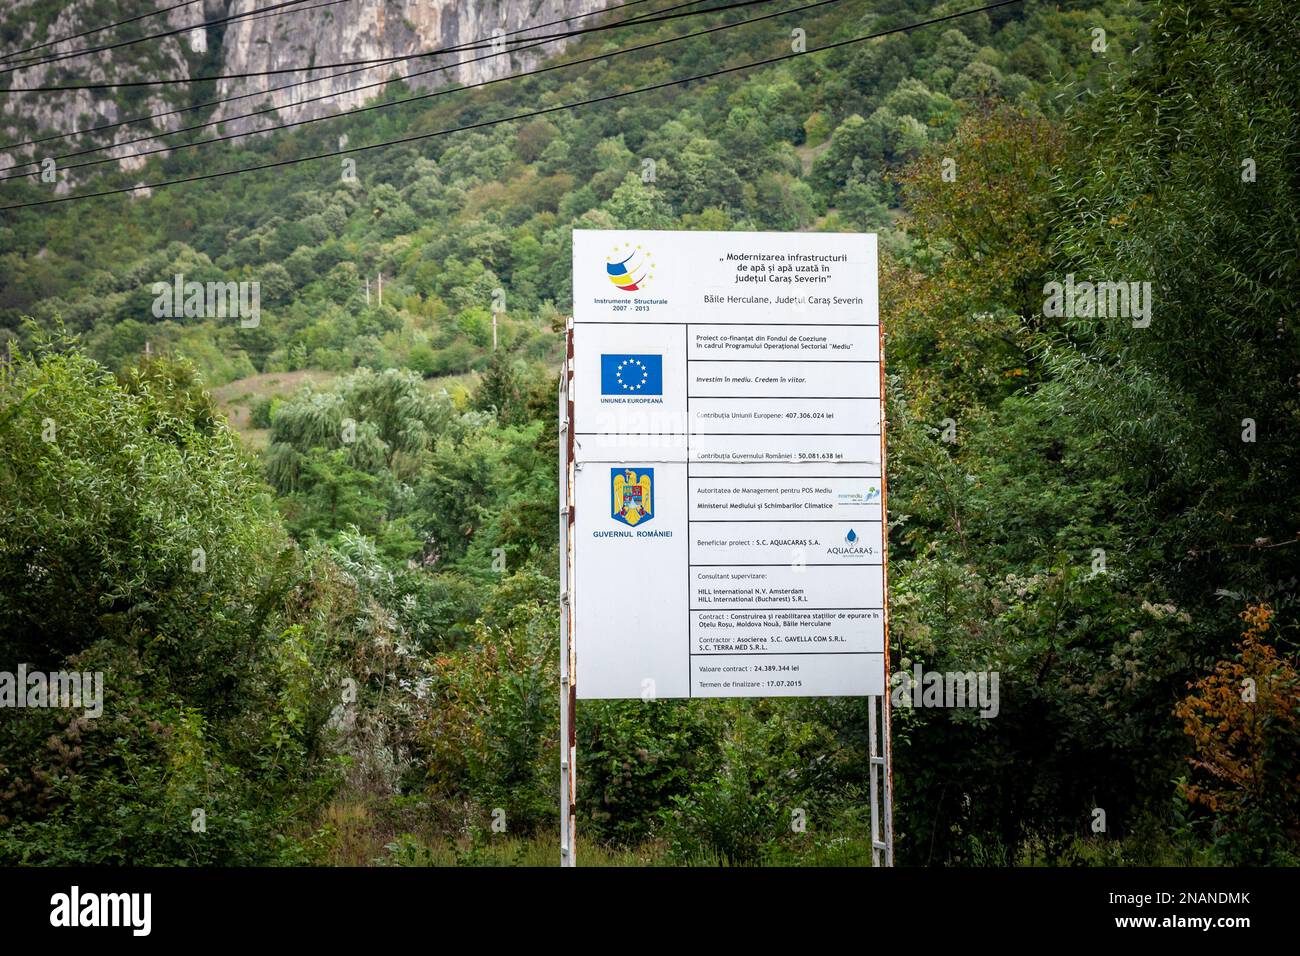 Picture of a sign indicating a reconstruction project is funded by the romanian government and by the European Union in Romania, in Baile Herculane. Stock Photo